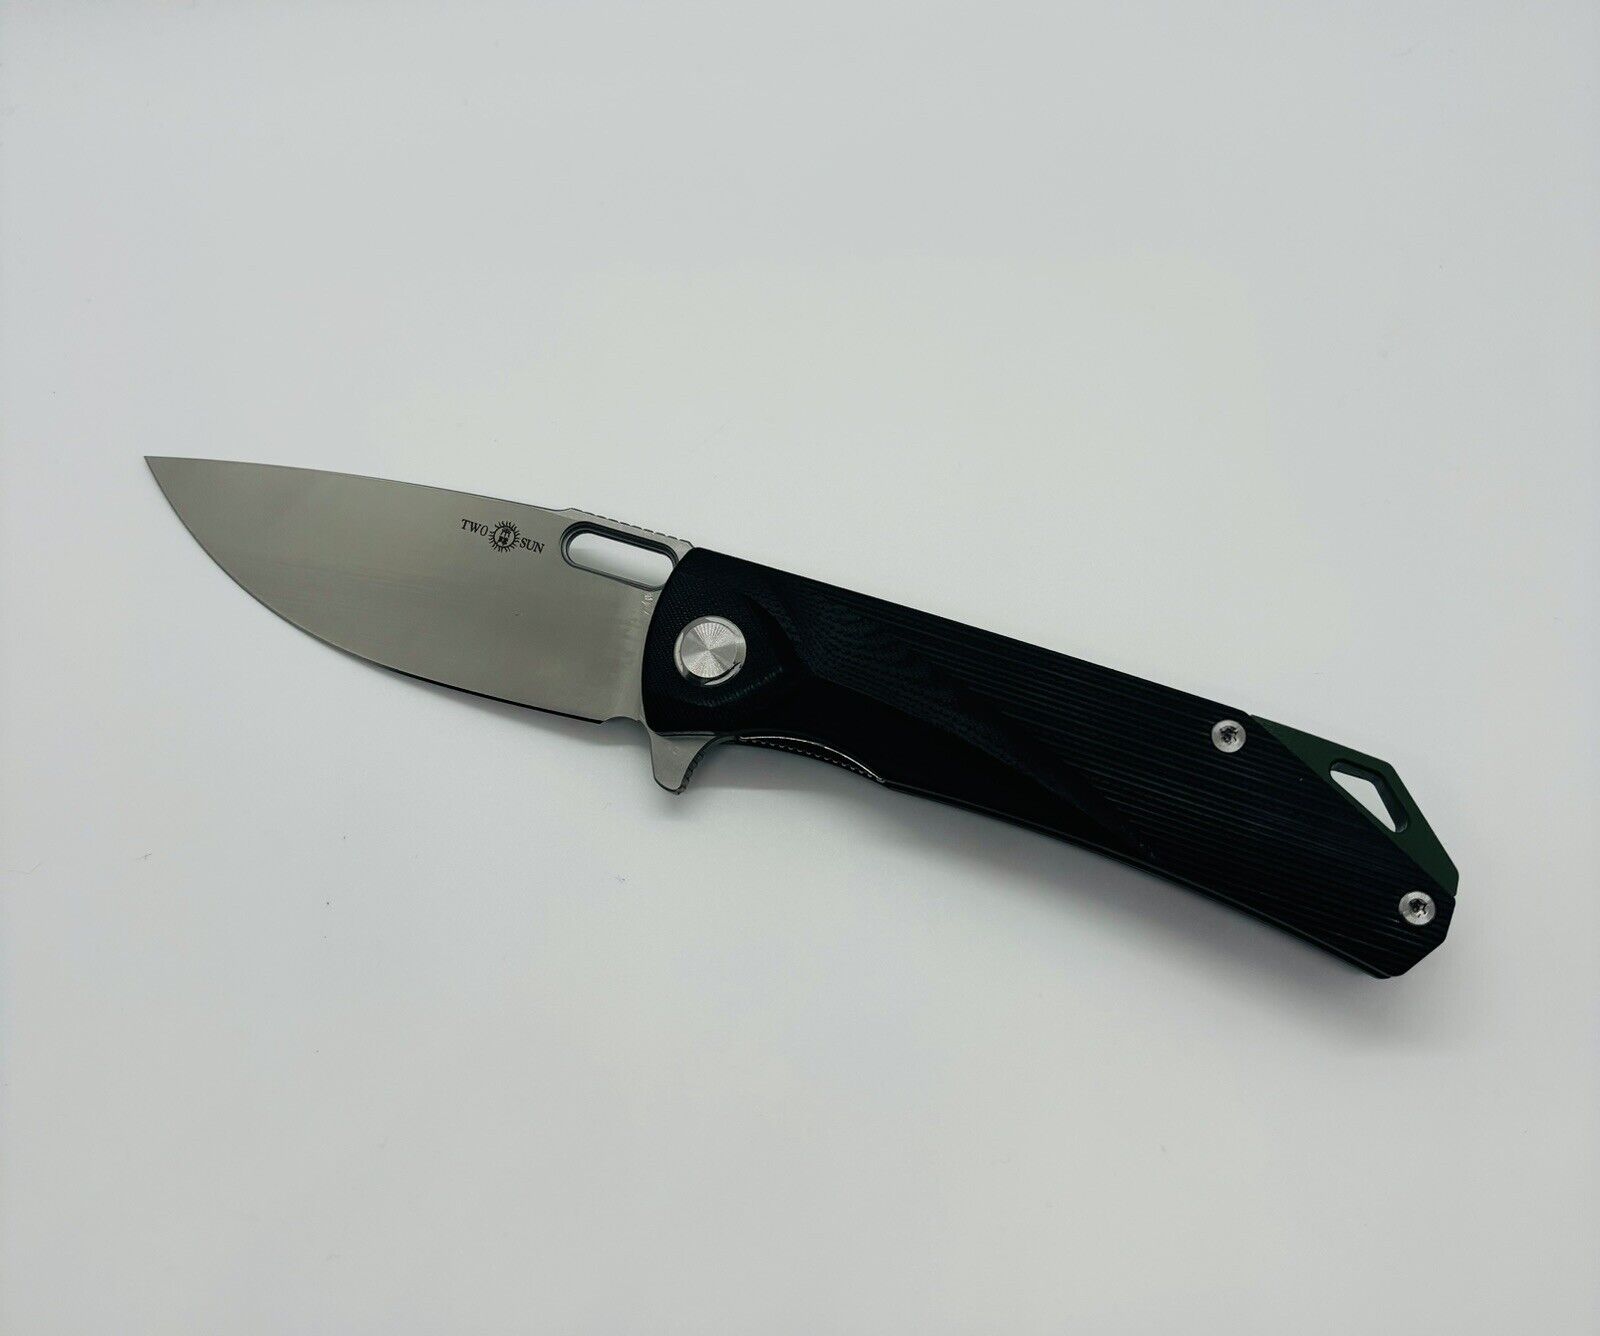 New Twosun Knives TS502 Black G10 Handle D2 Steel Blade Outdoors/Defense